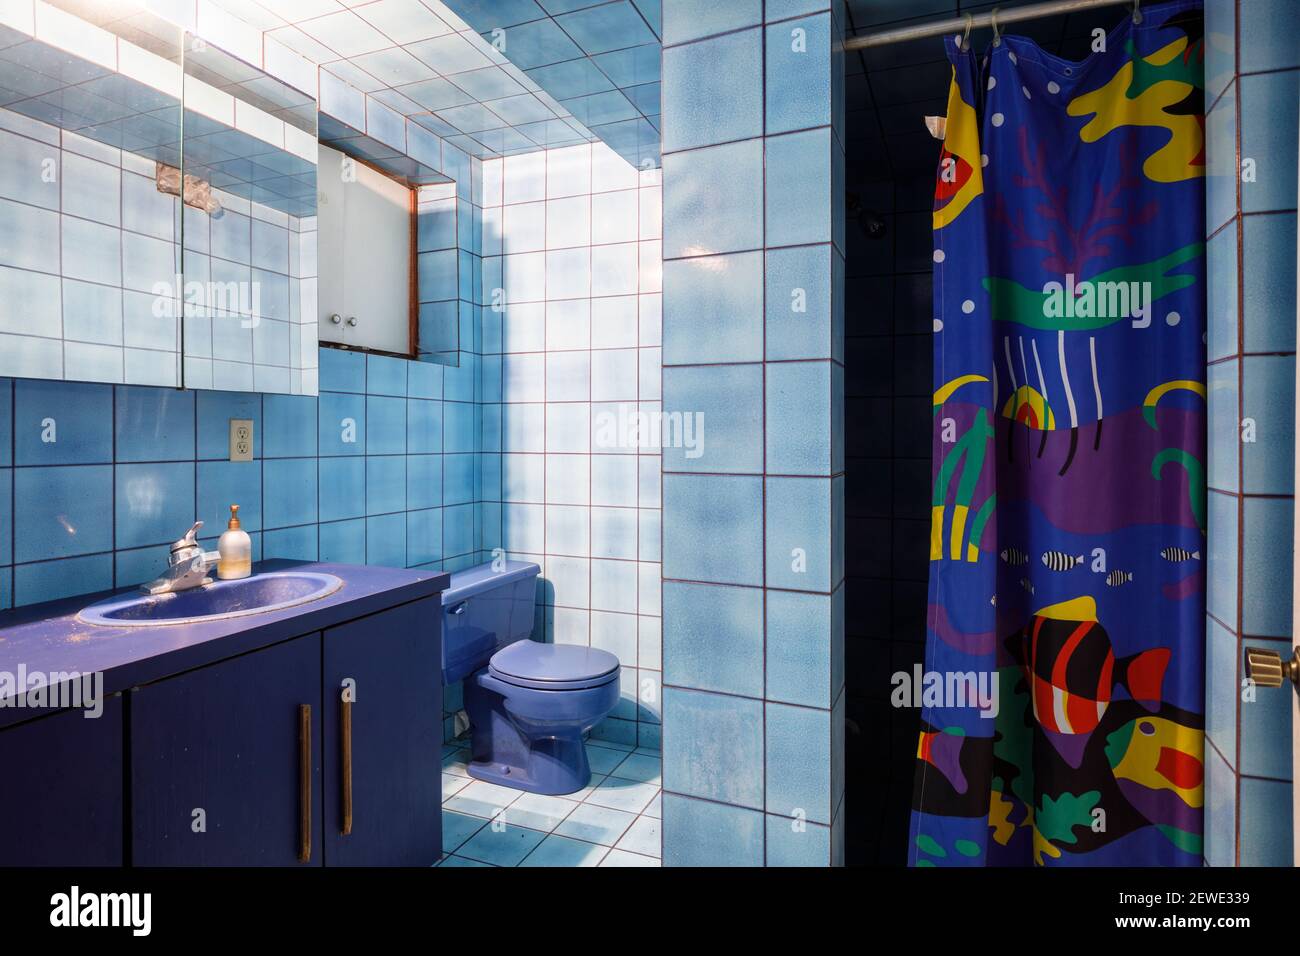 A bathroom with a blue theme going on inside an abandoned mansion. Stock Photo